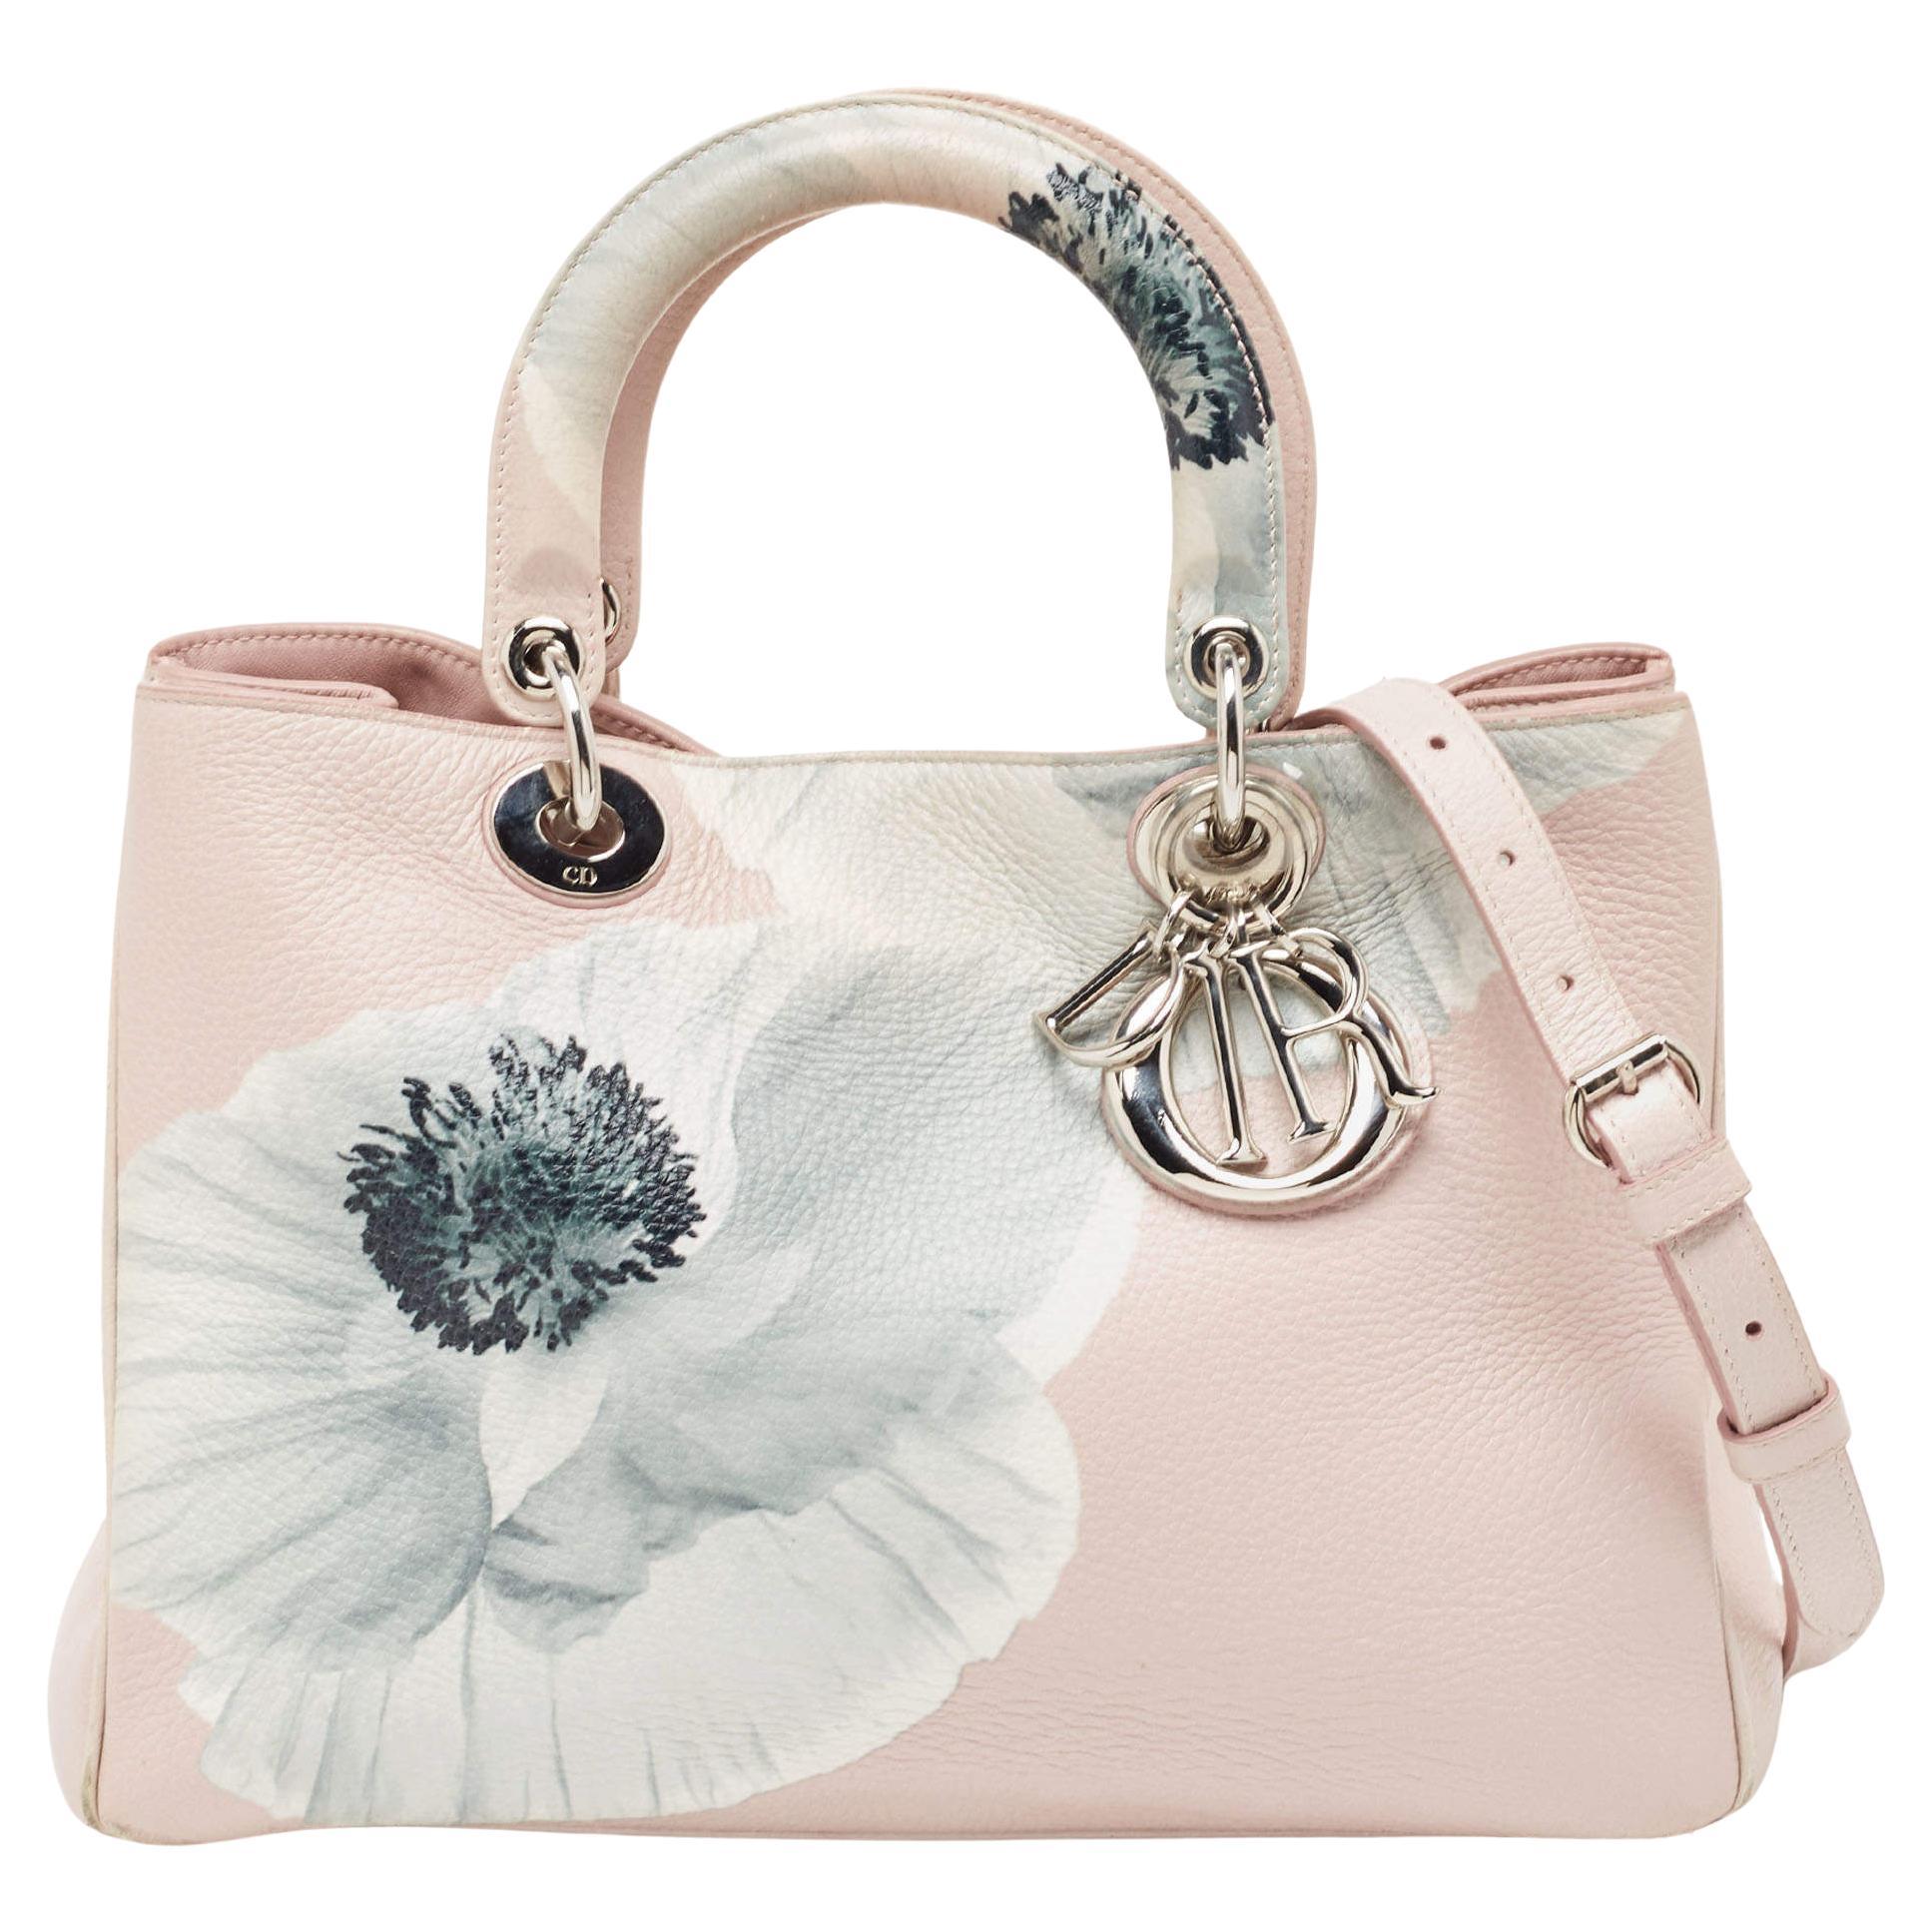 Dior Pink Floral Print Leather Medium Diorissimo Shopper Tote For Sale